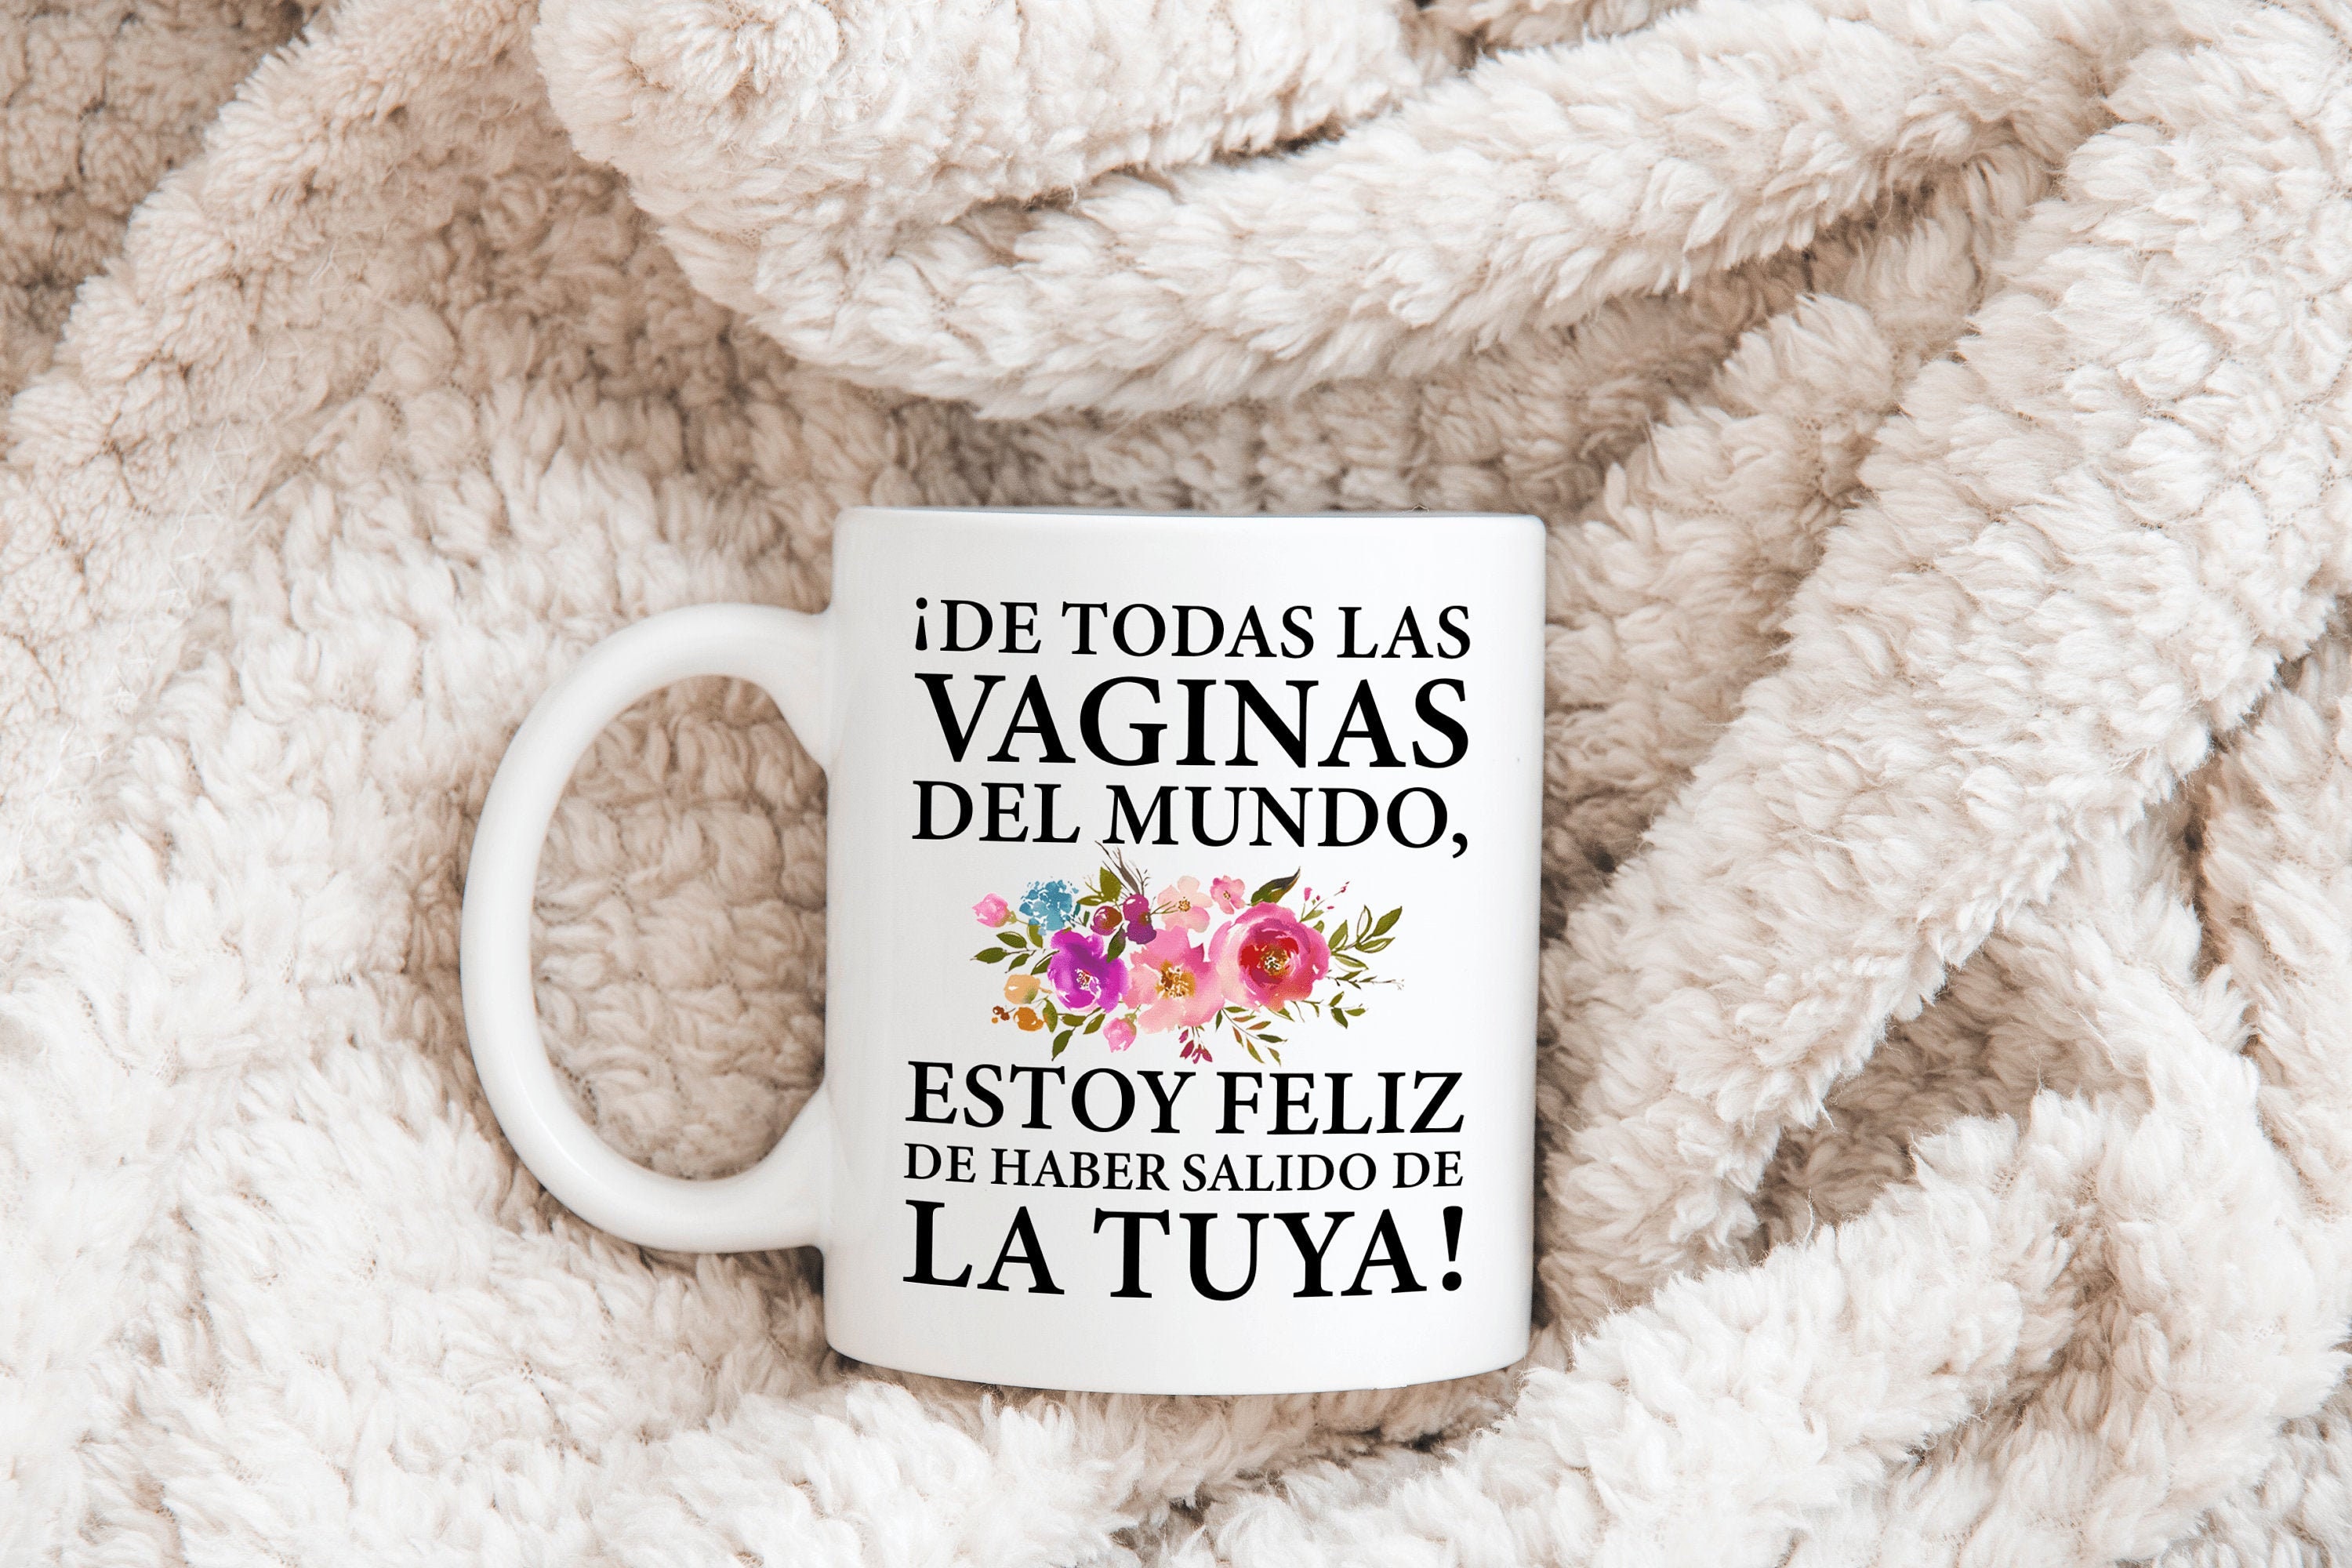 UAREHIBY Gifts in Spanish for Christmas,Mothers Day,Navidad with  Blanket,Hispanic Mom Birthday Idea …See more UAREHIBY Gifts in Spanish for